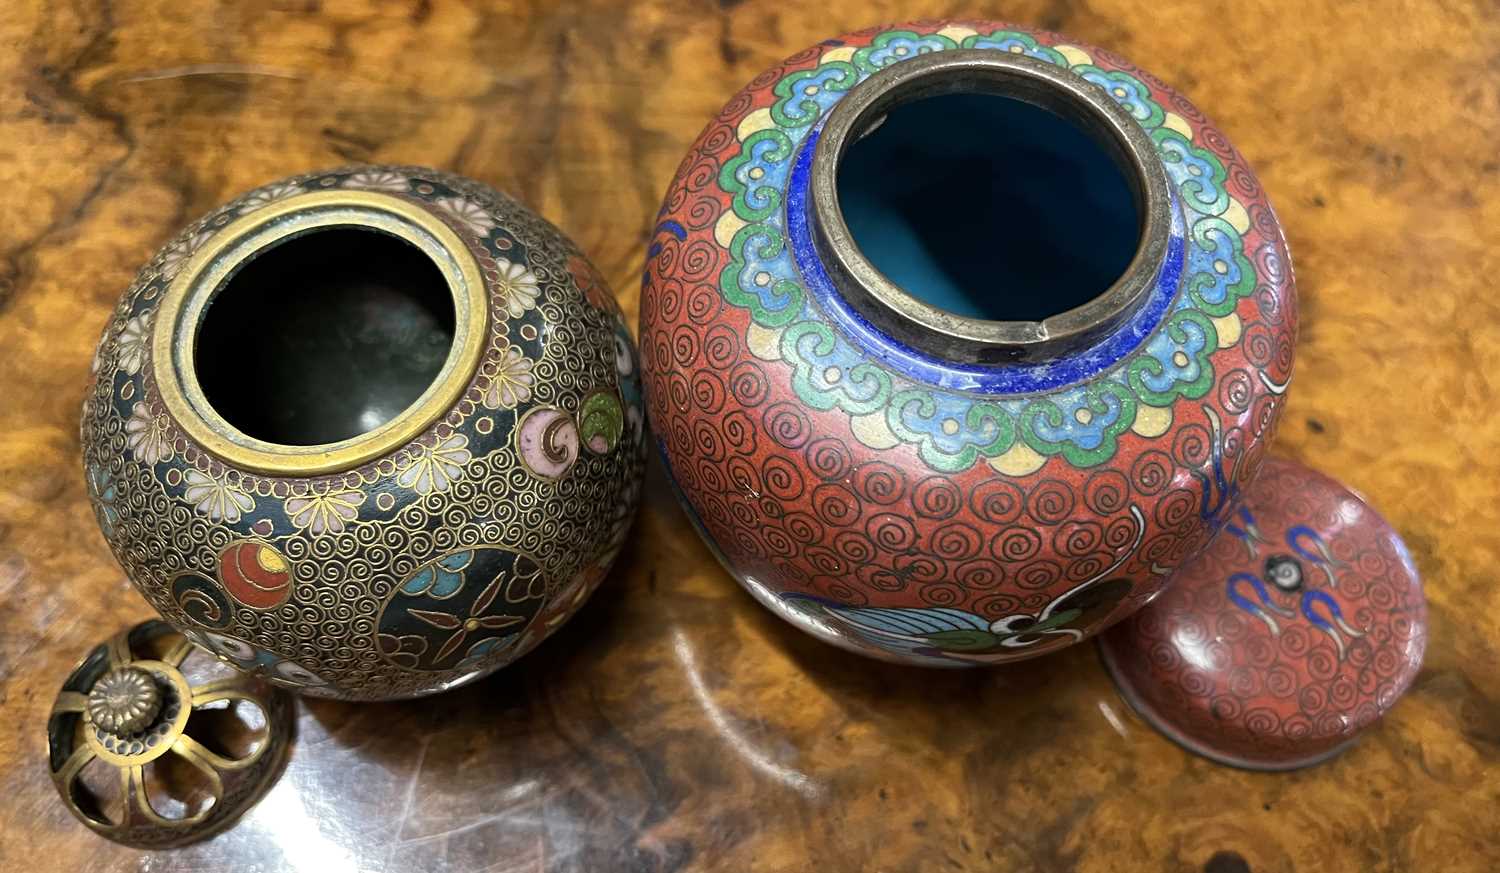 Cloisonne incense burner of globular form with pierced cover together with a small Cloisonne jar and - Image 7 of 13